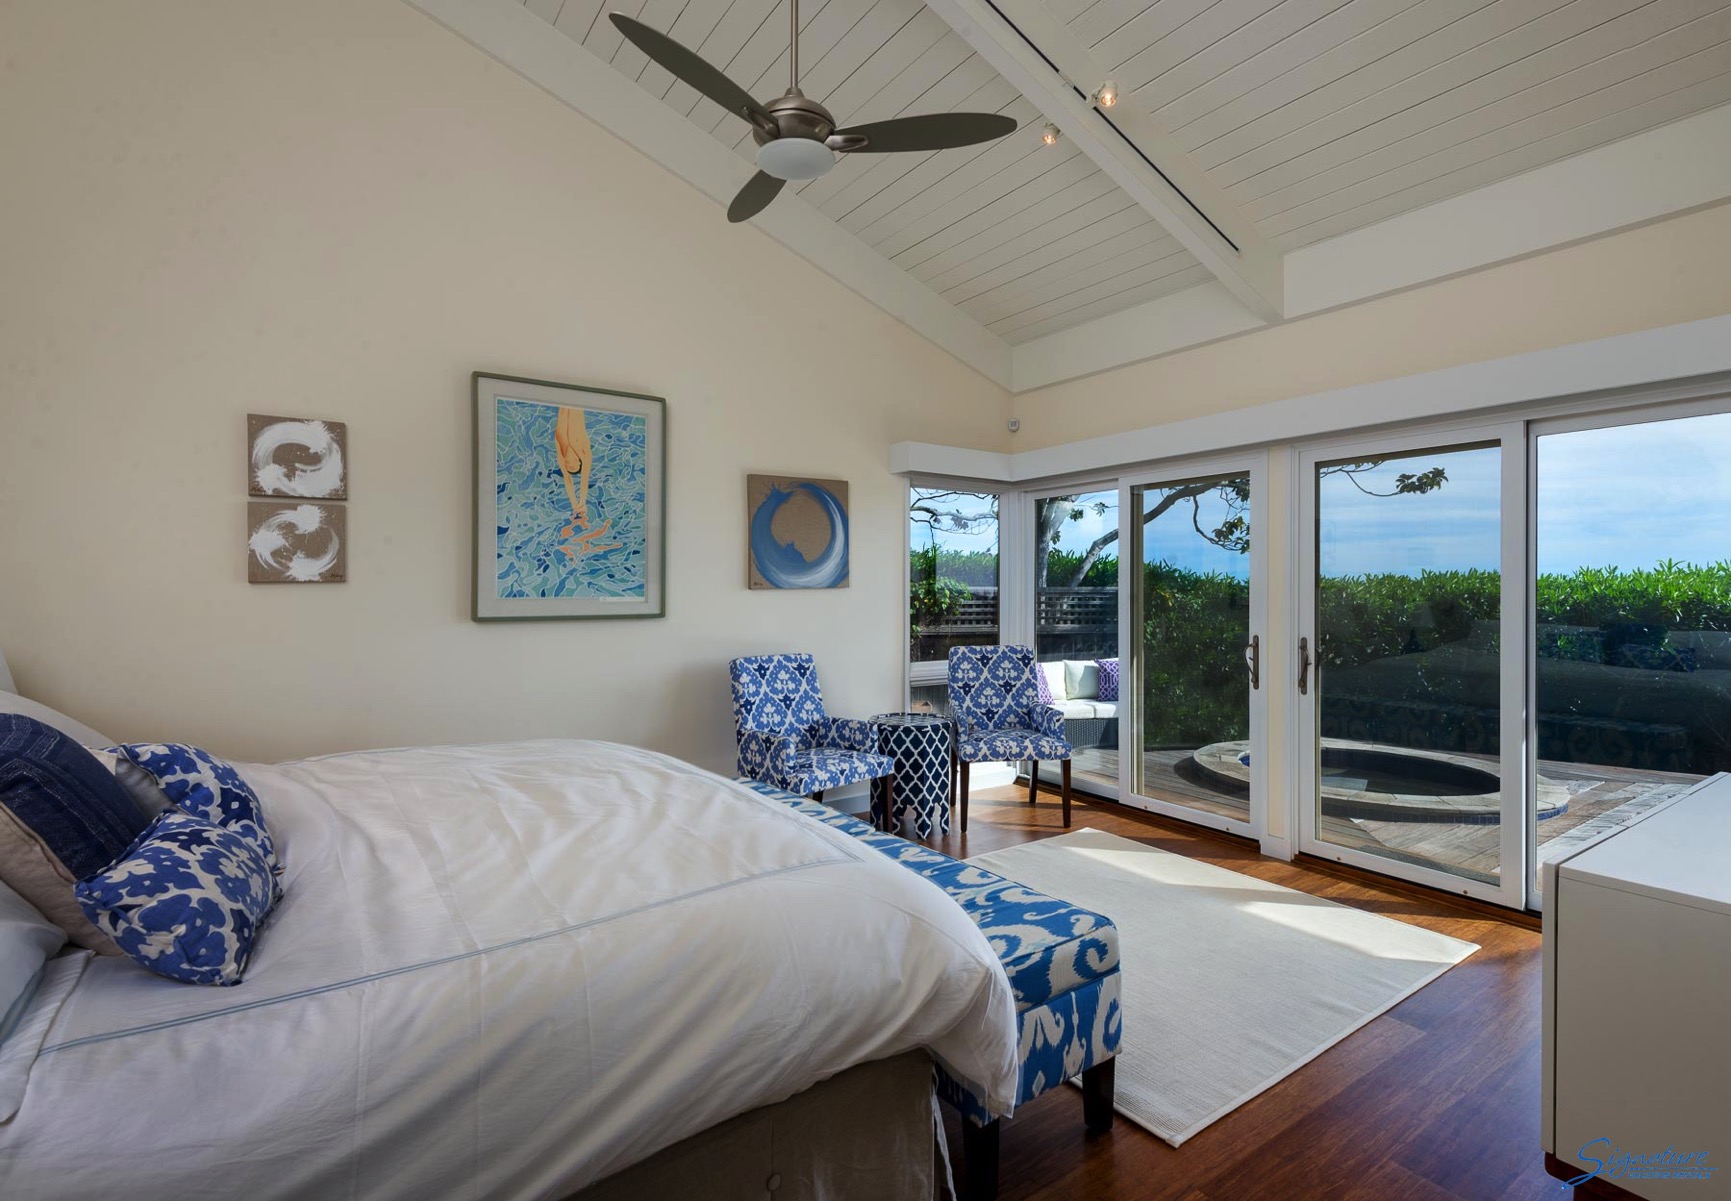 The master bedroom has views of the ocean and a deck with a sunken hot tub.